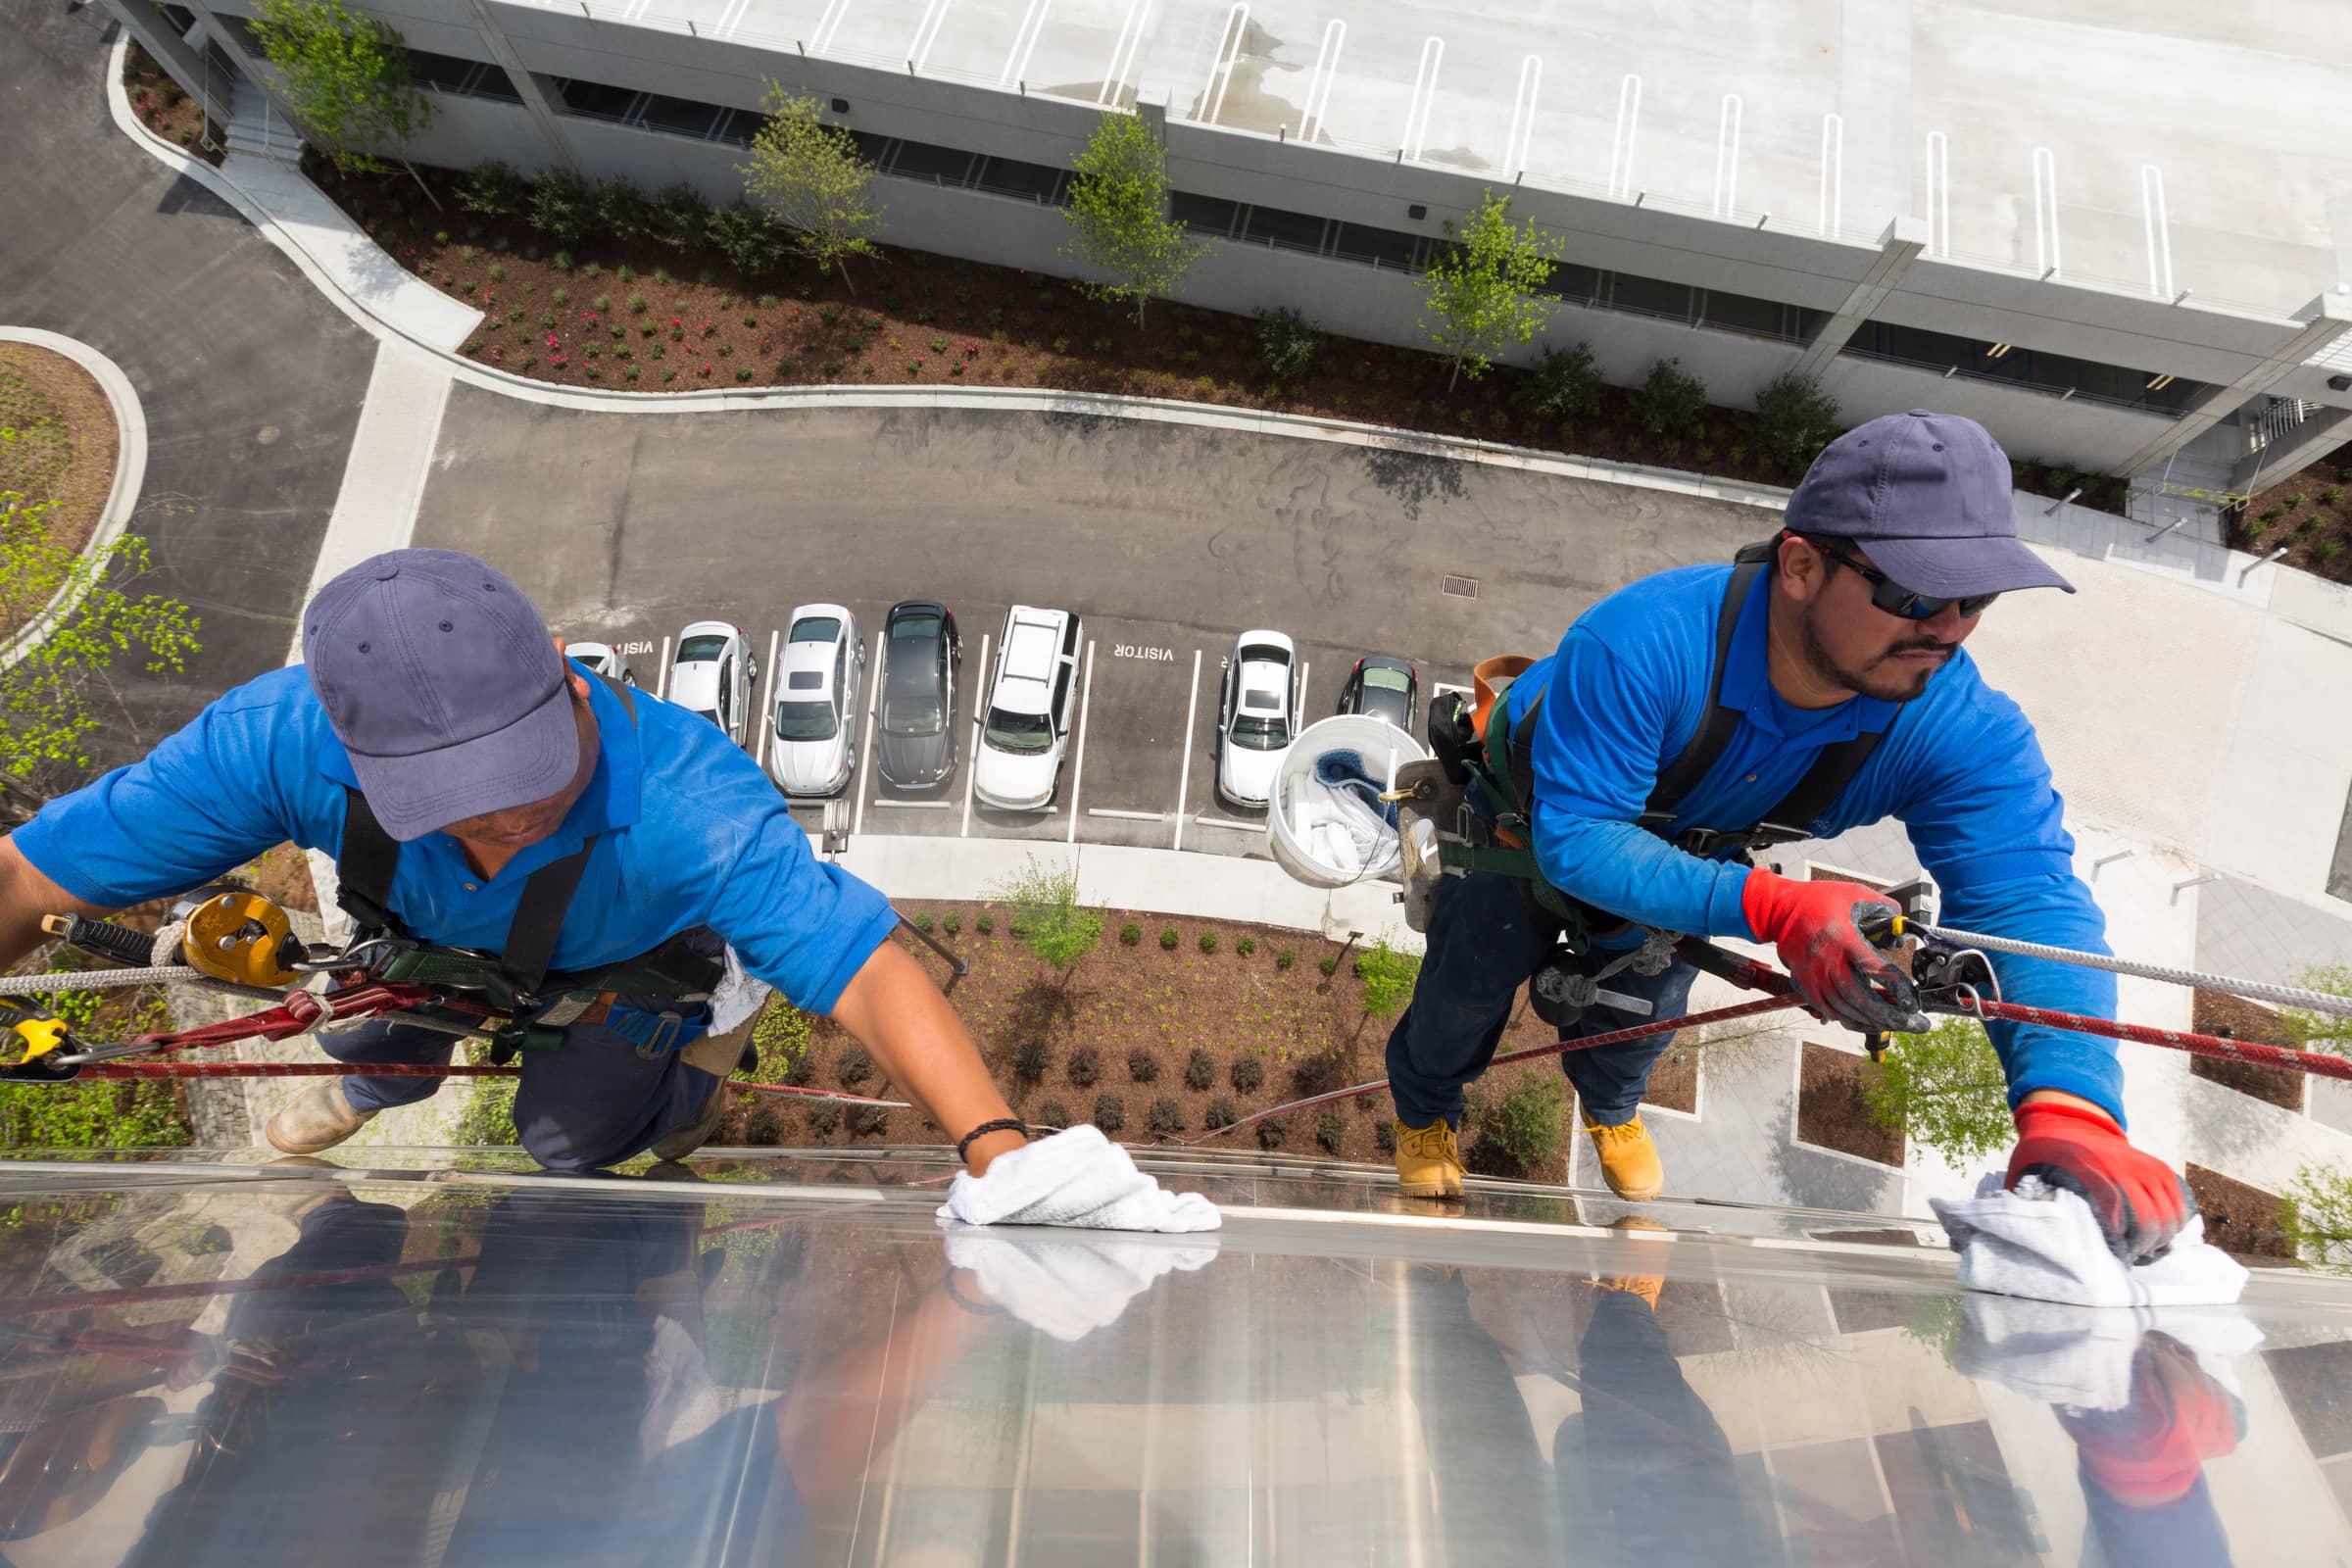 Two men cleaning windows on office building attached by ropes. Picture is taken looking downwards towards the car park below